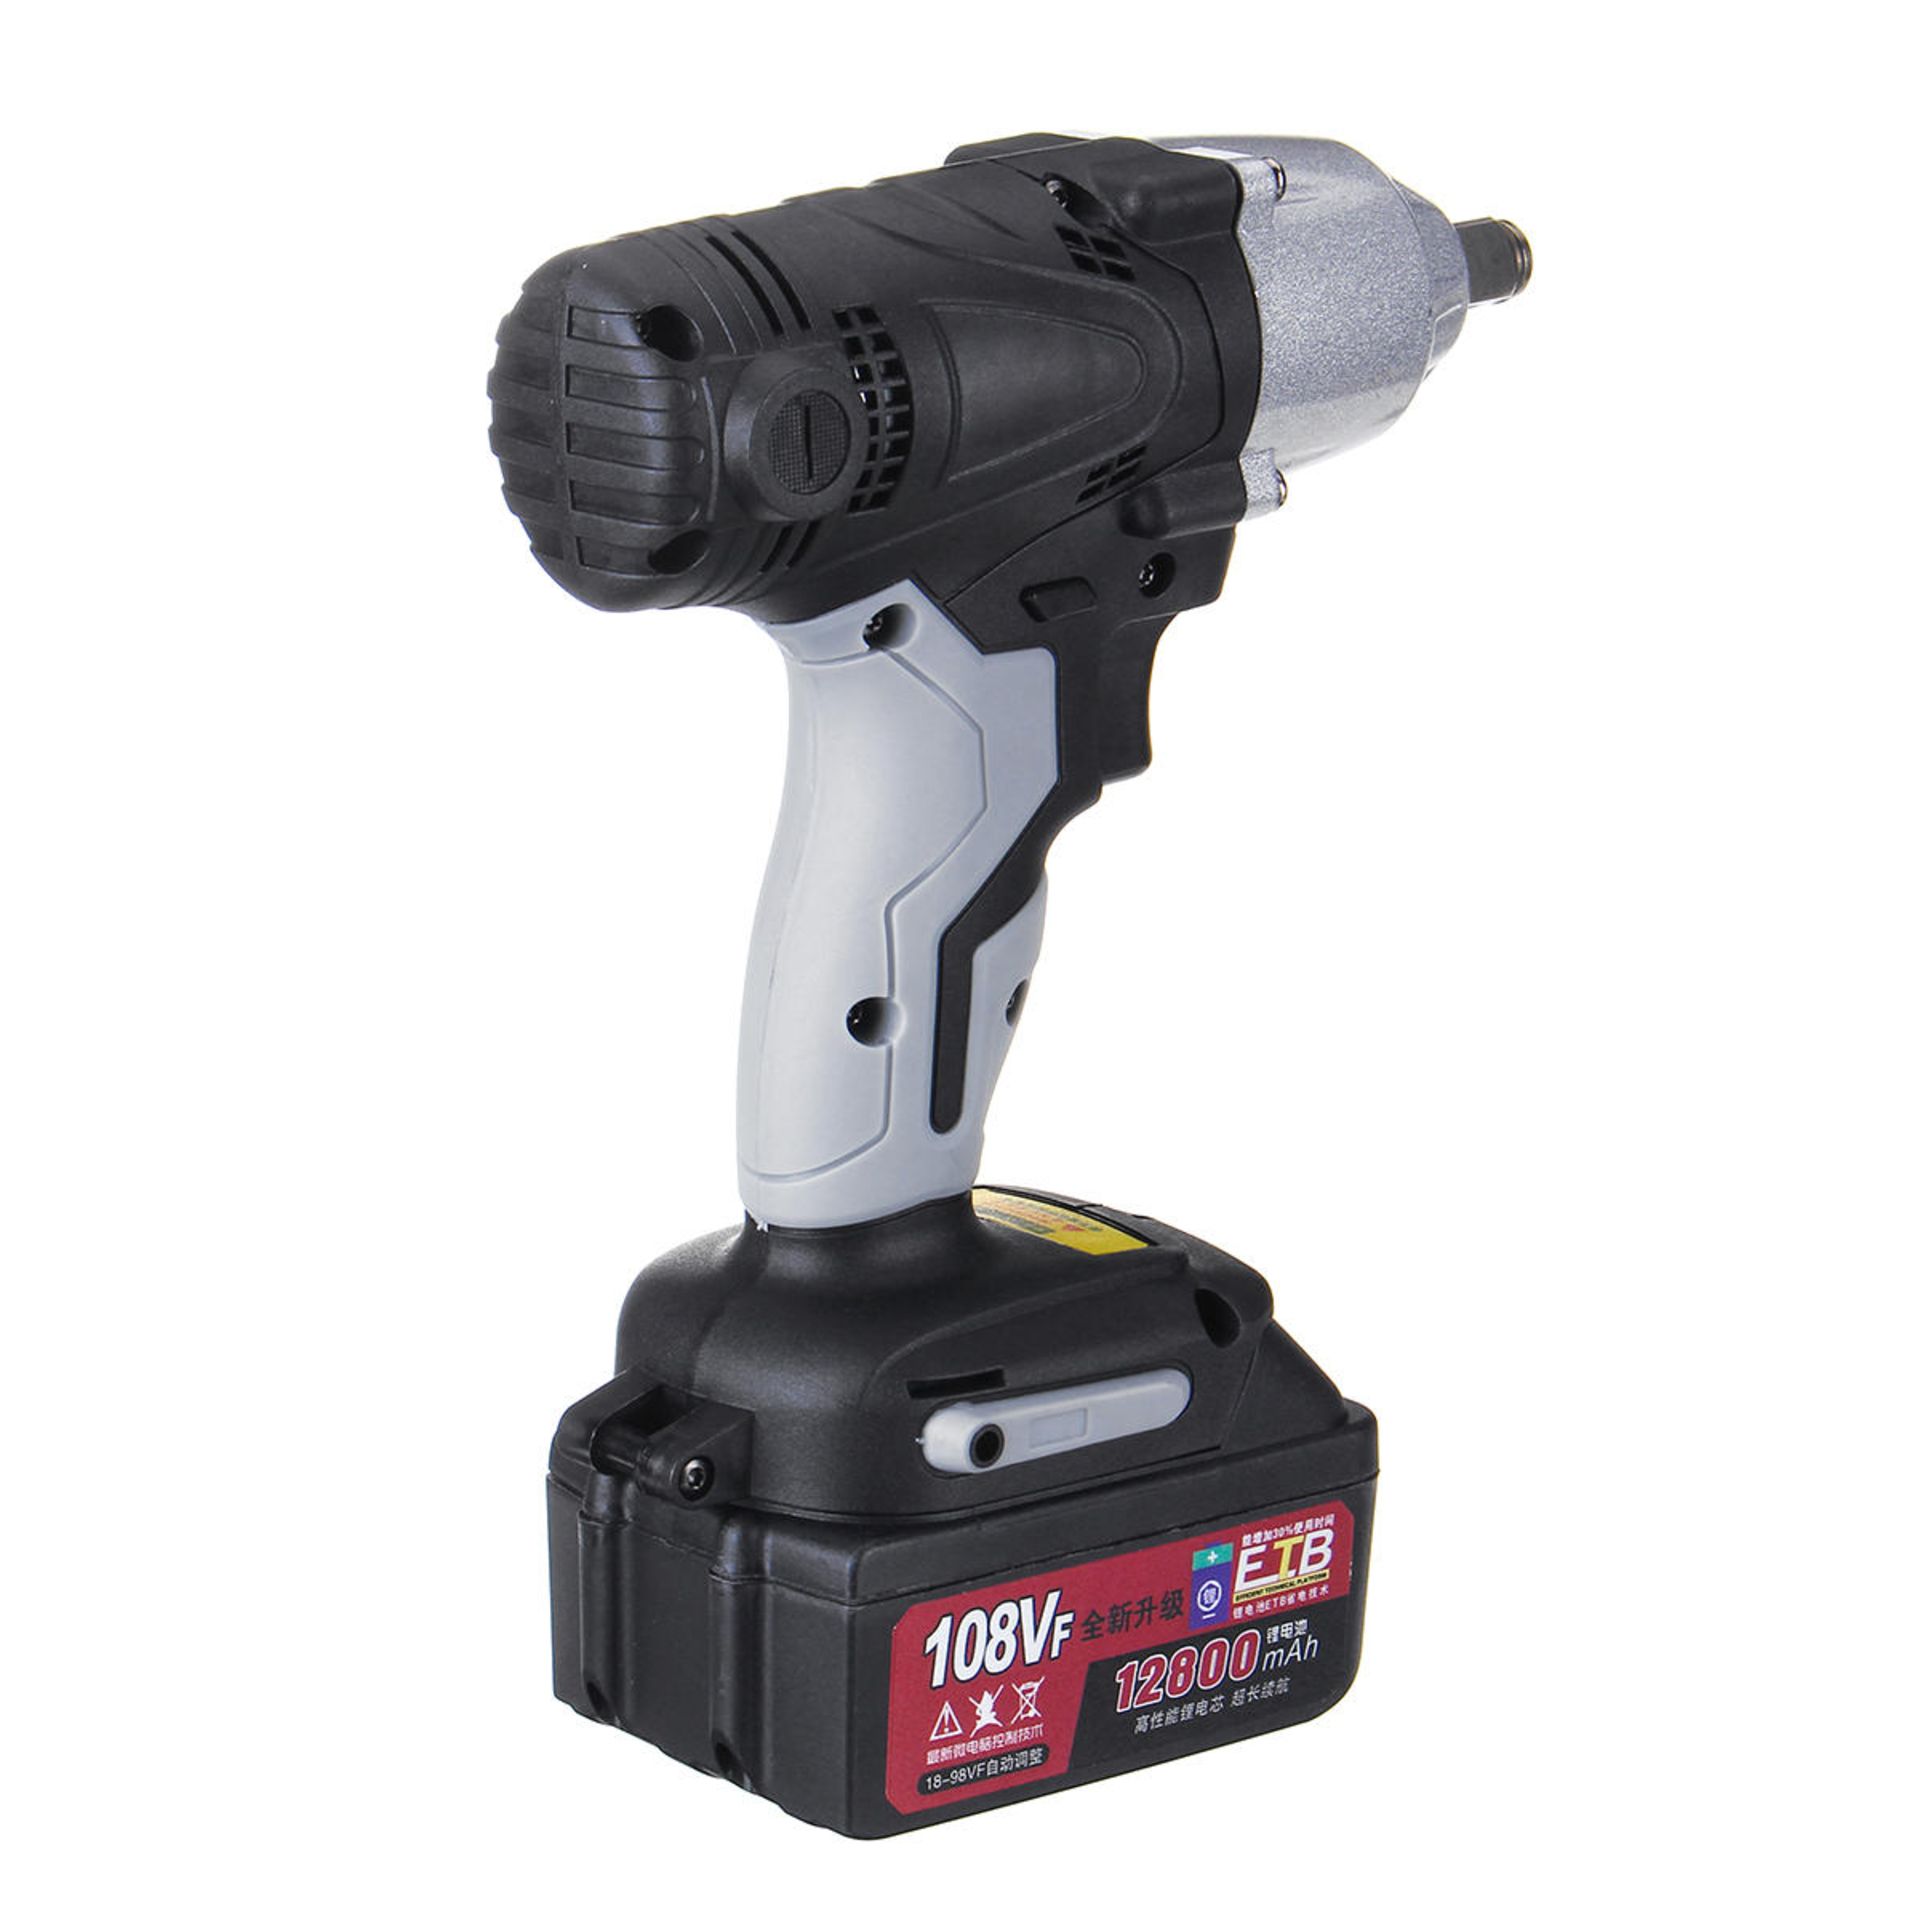 108Vf 12800Mah Cordless Electric Impact Wrench Drill Driver W/ Lithium-Ion Battery